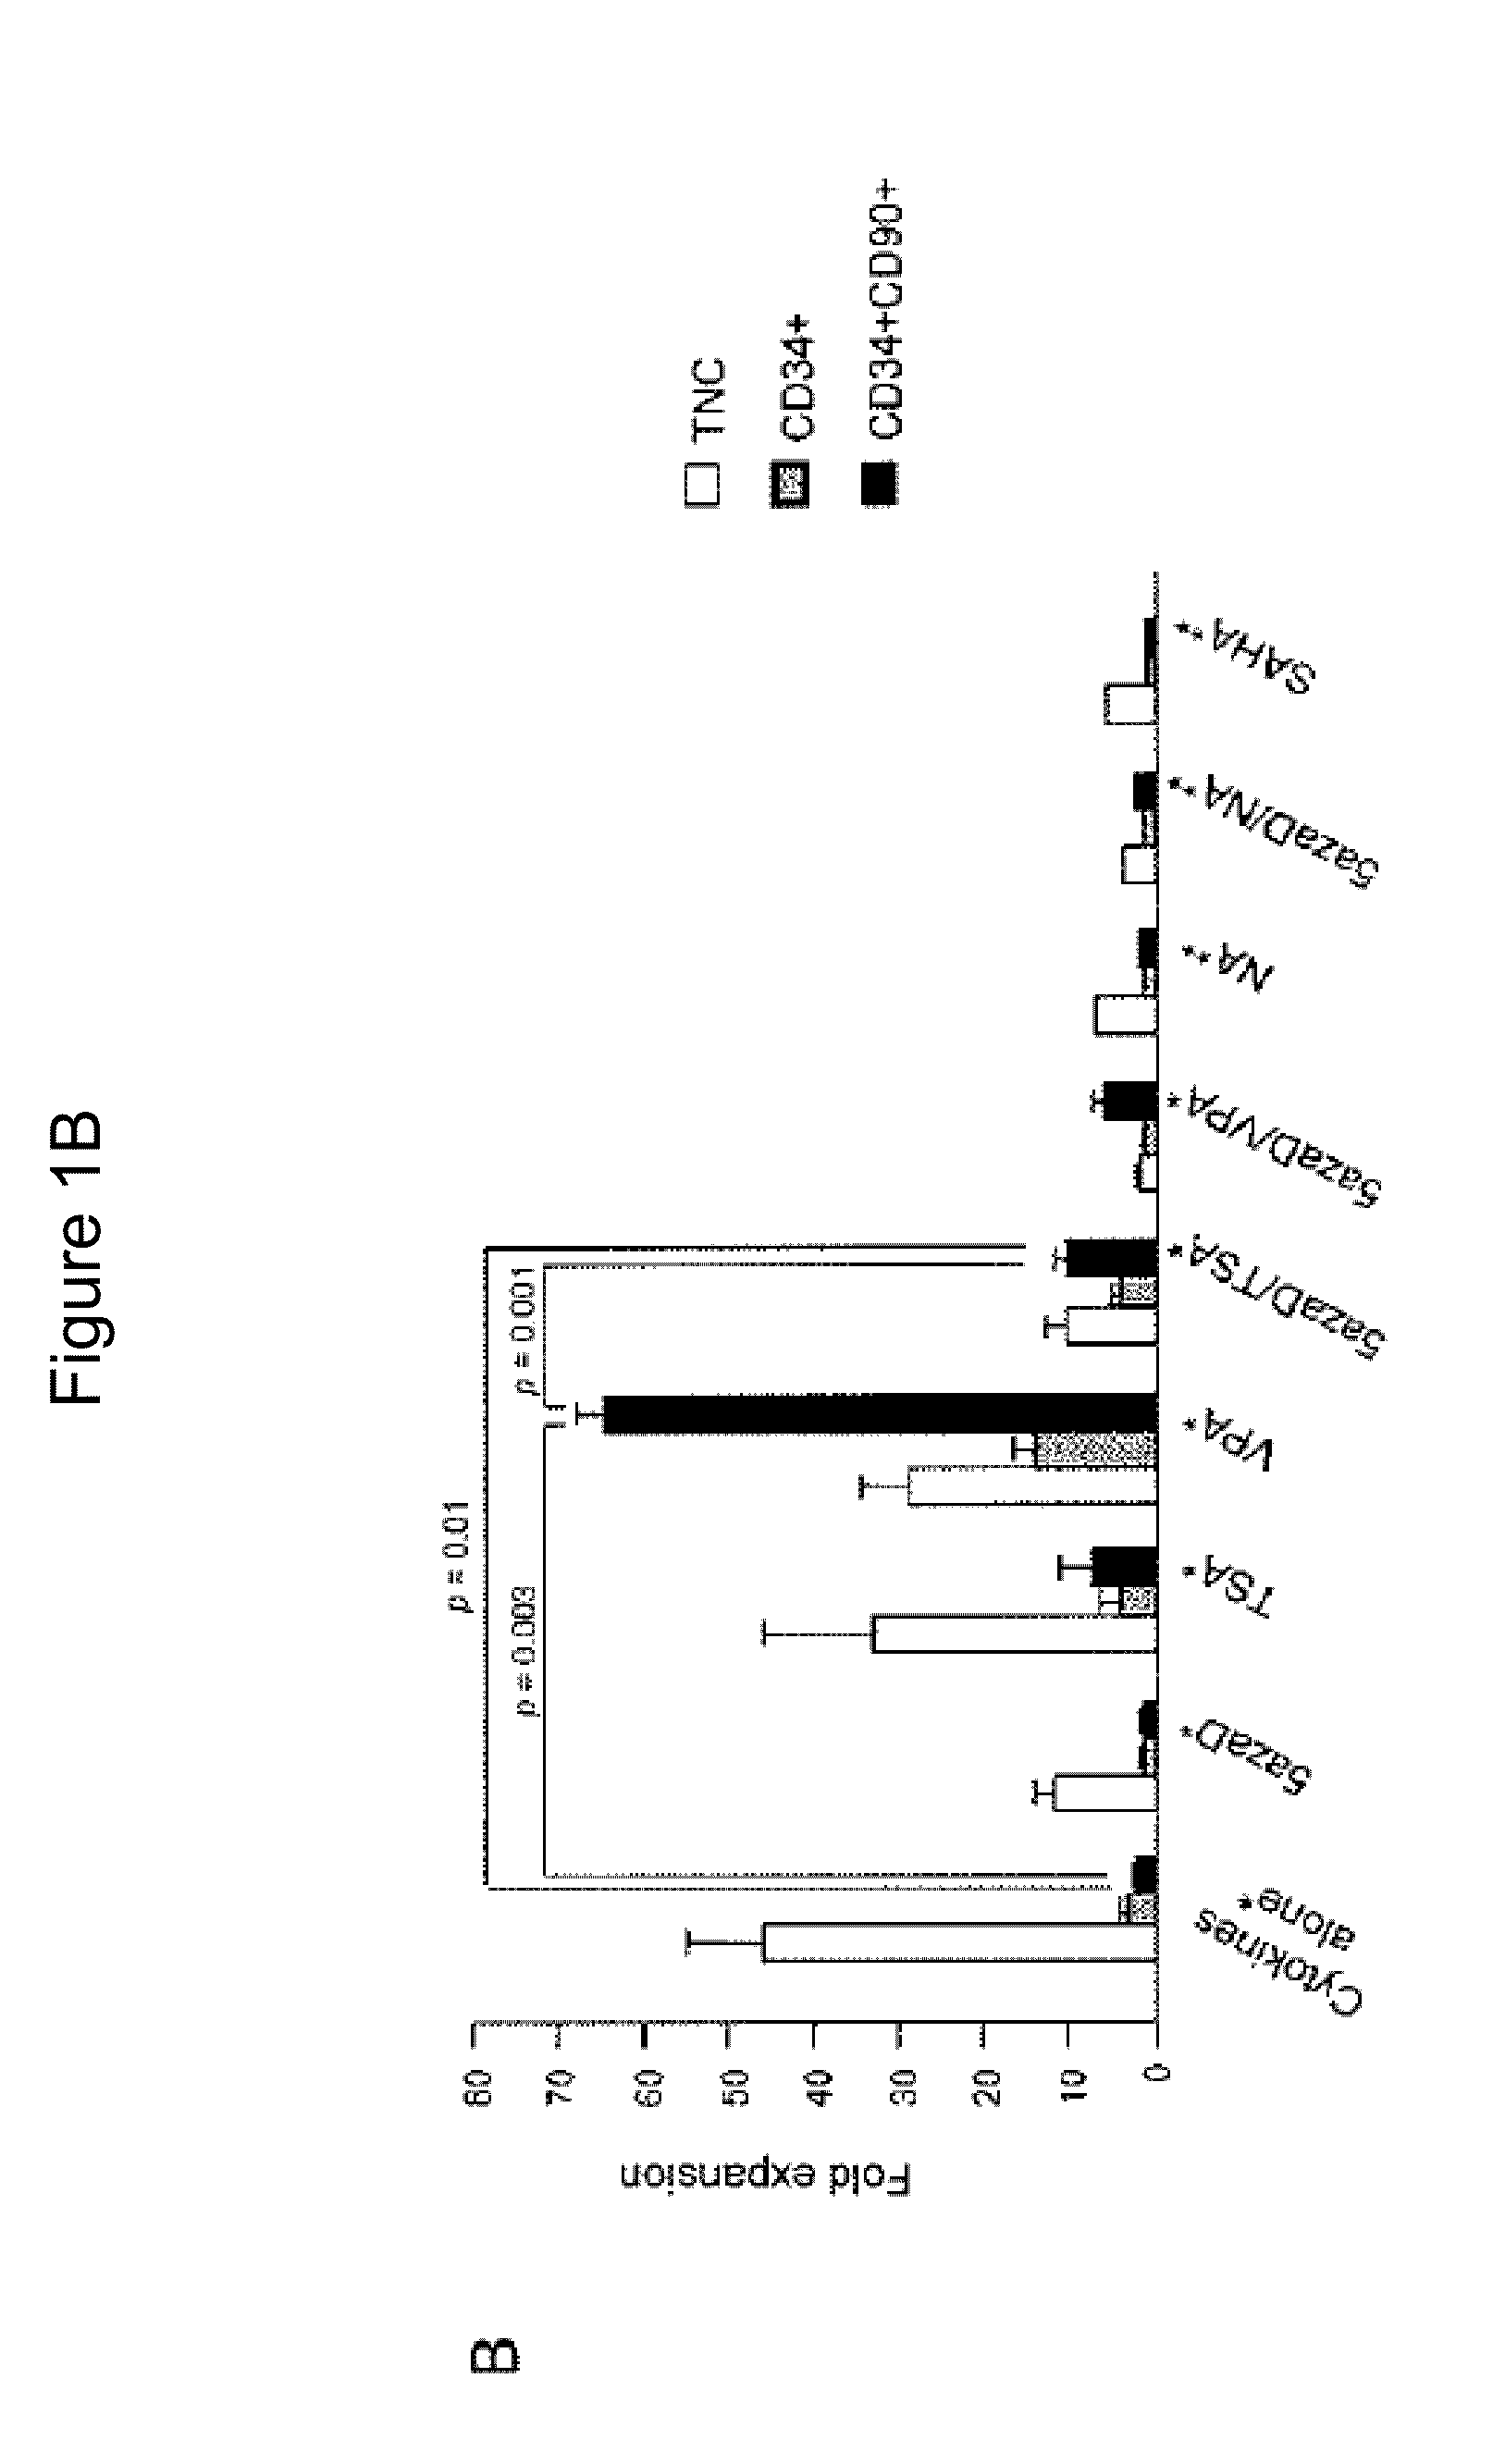 Methods of Ex Vivo Expansion of Blood Progenitor Cells, and Generation of Composite Grafts